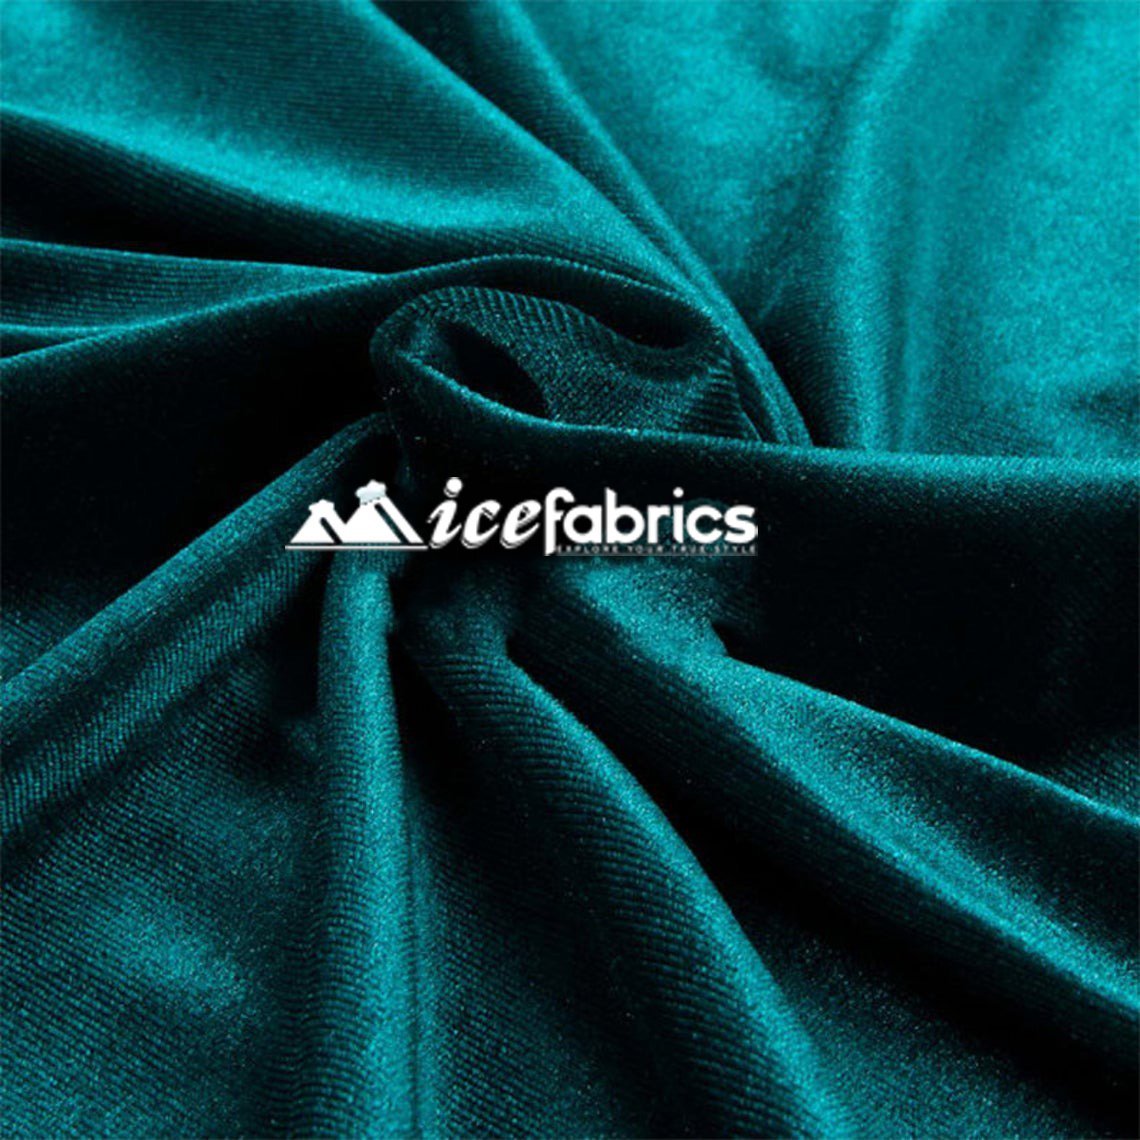 Hight Quality Stretch Velvet Fabric By The Roll (20 yards) Wholesale FabricVelvet FabricICE FABRICSICE FABRICSTealBy The Roll (60" Wide)Hight Quality Stretch Velvet Fabric By The Roll (20 yards) Wholesale Fabric ICE FABRICS Teal